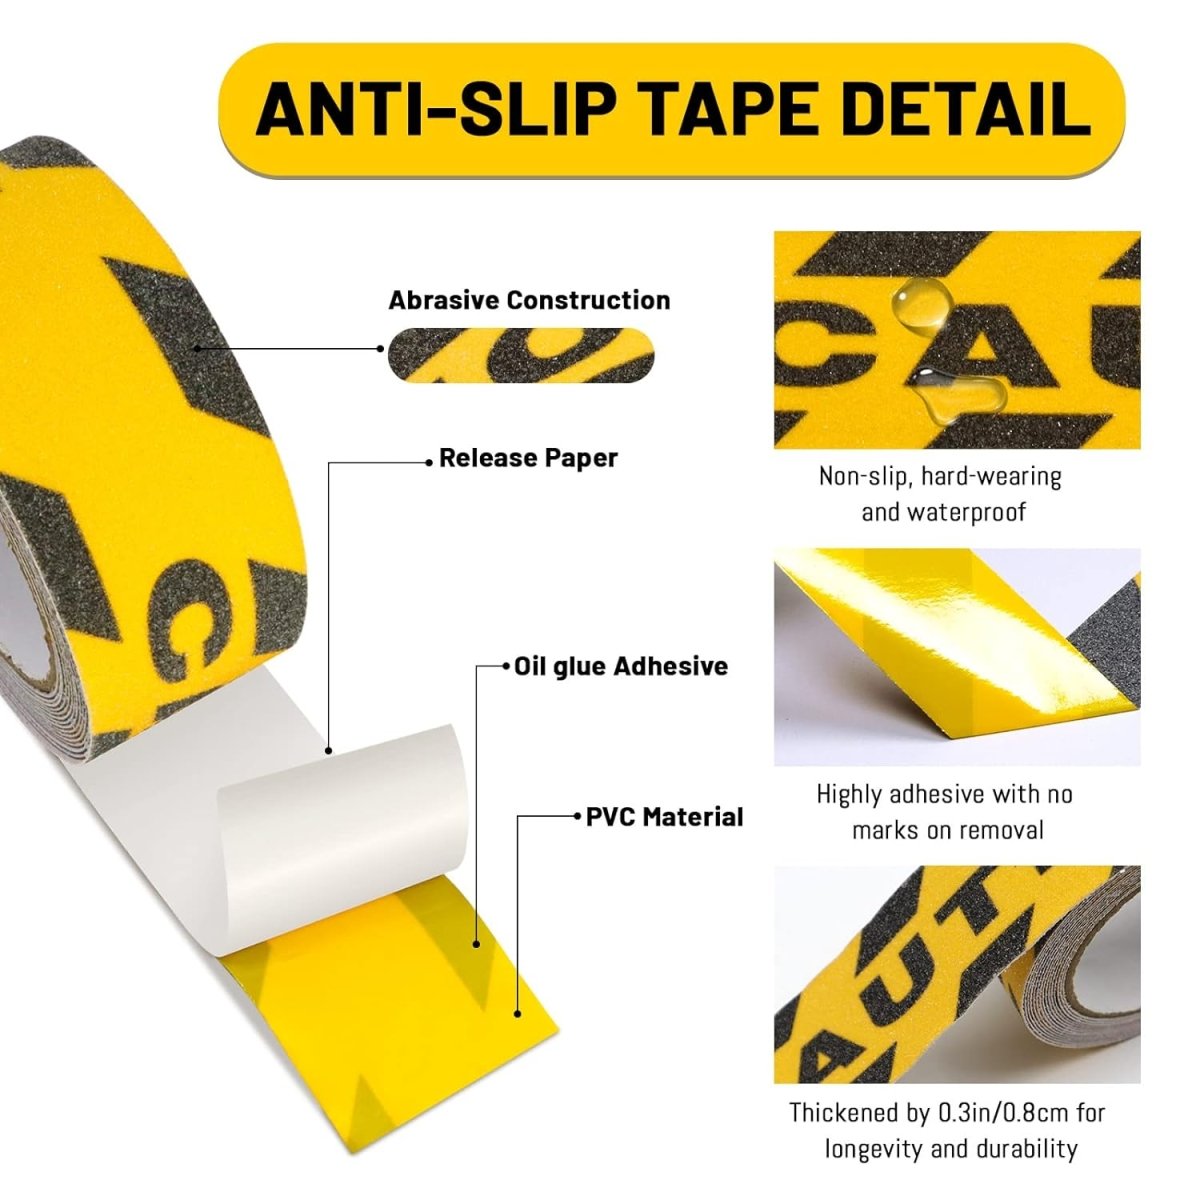 Anti Slip Tape Industrial Strength Adhesive for Stairs Steps Ladder, Indoor Outdoor Usage - Yellow-Black (5M x 50MM) Anti Skid Tape- Royalkart - The Urban Store